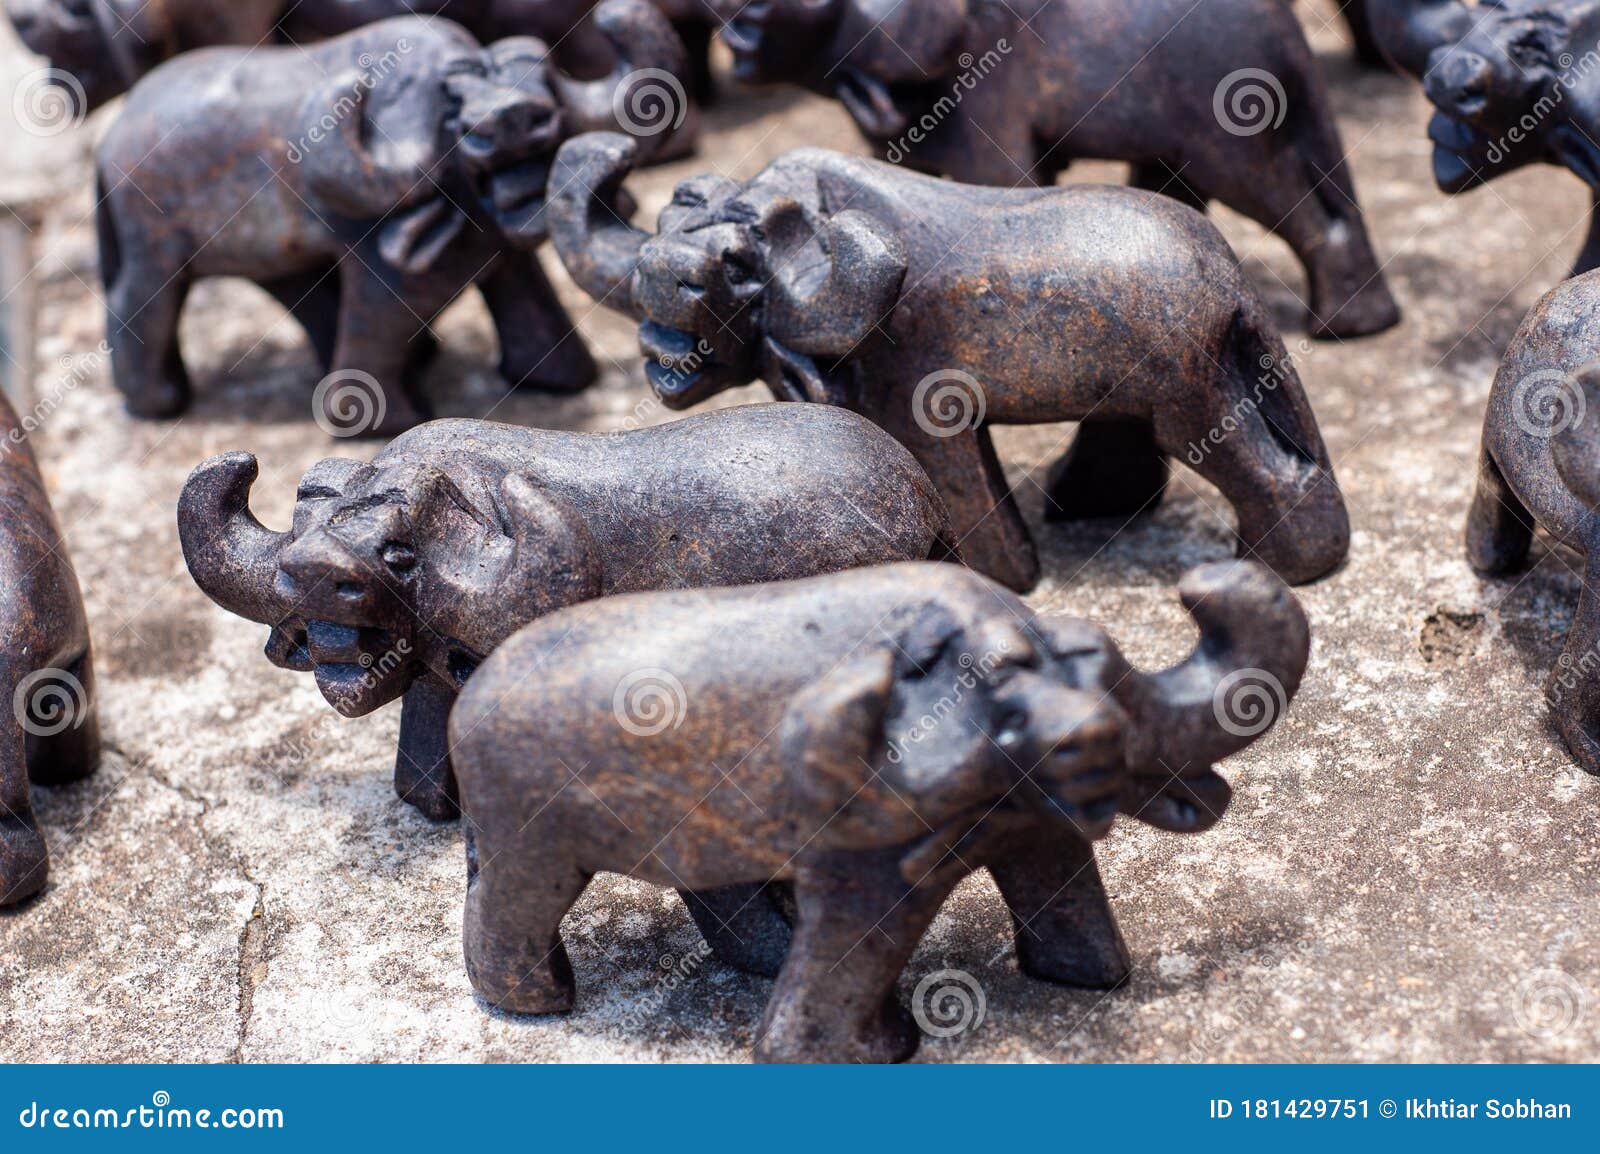 Stone Toys - Animal Replicas for Sale Stock Image - Image of toys, sale:  181429751